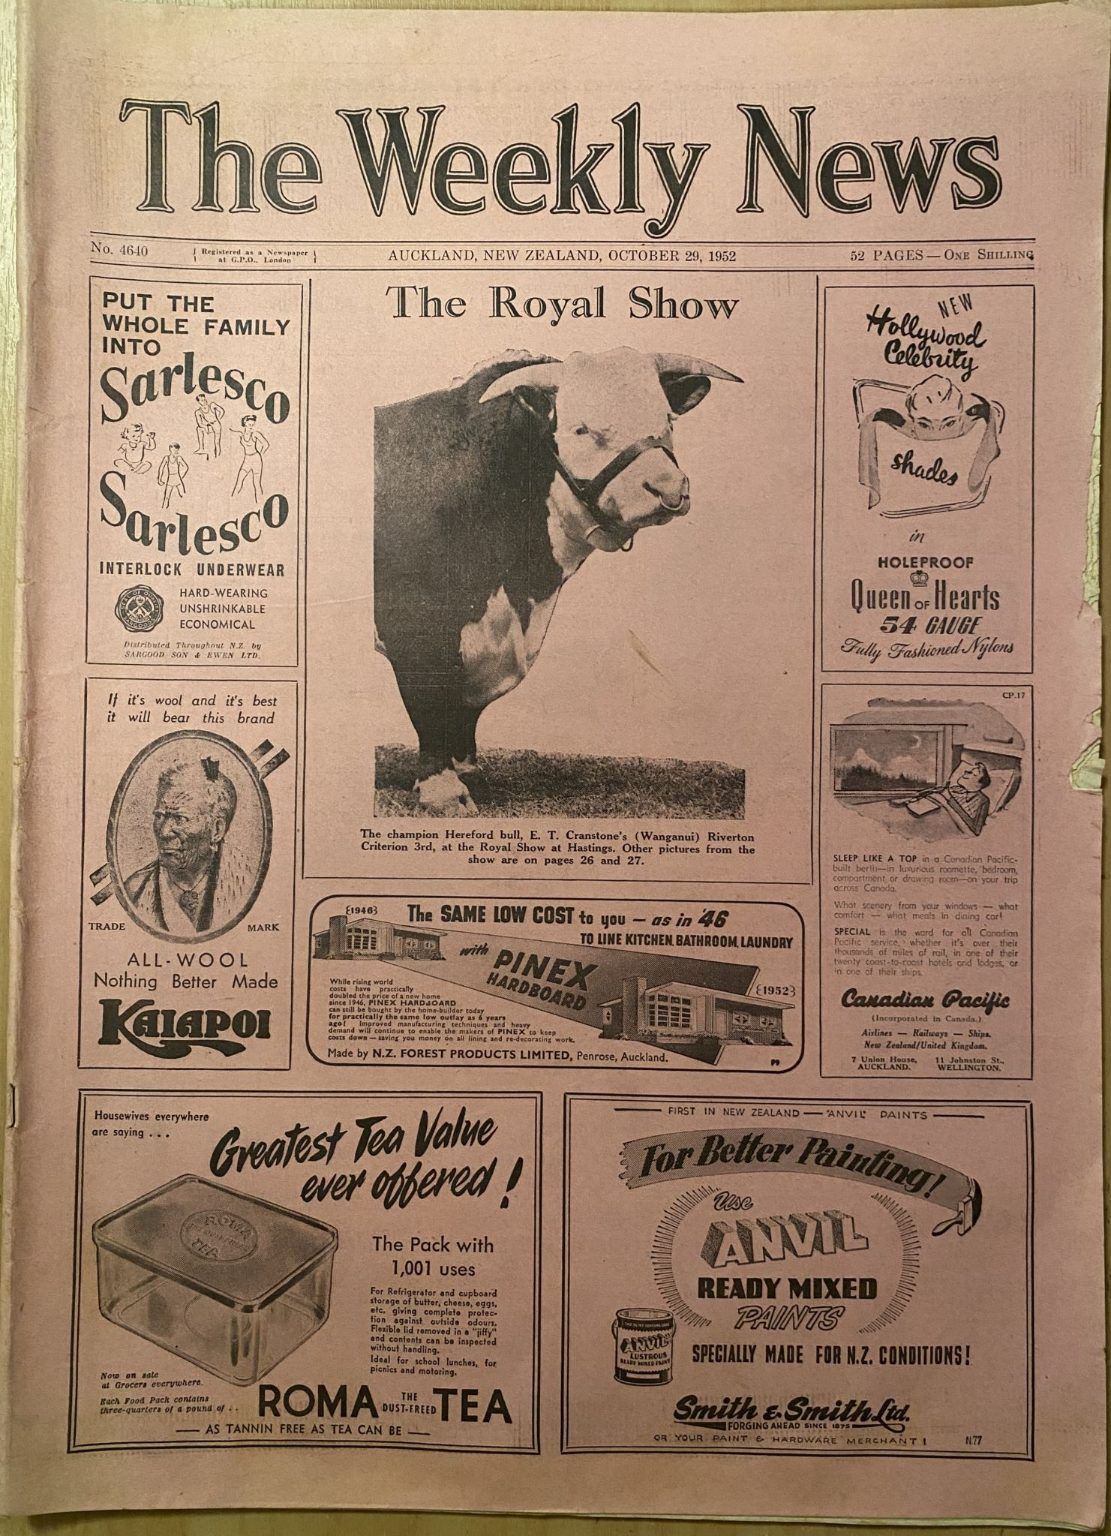 OLD NEWSPAPER: The Weekly News - No. 4640, 29 October 1952